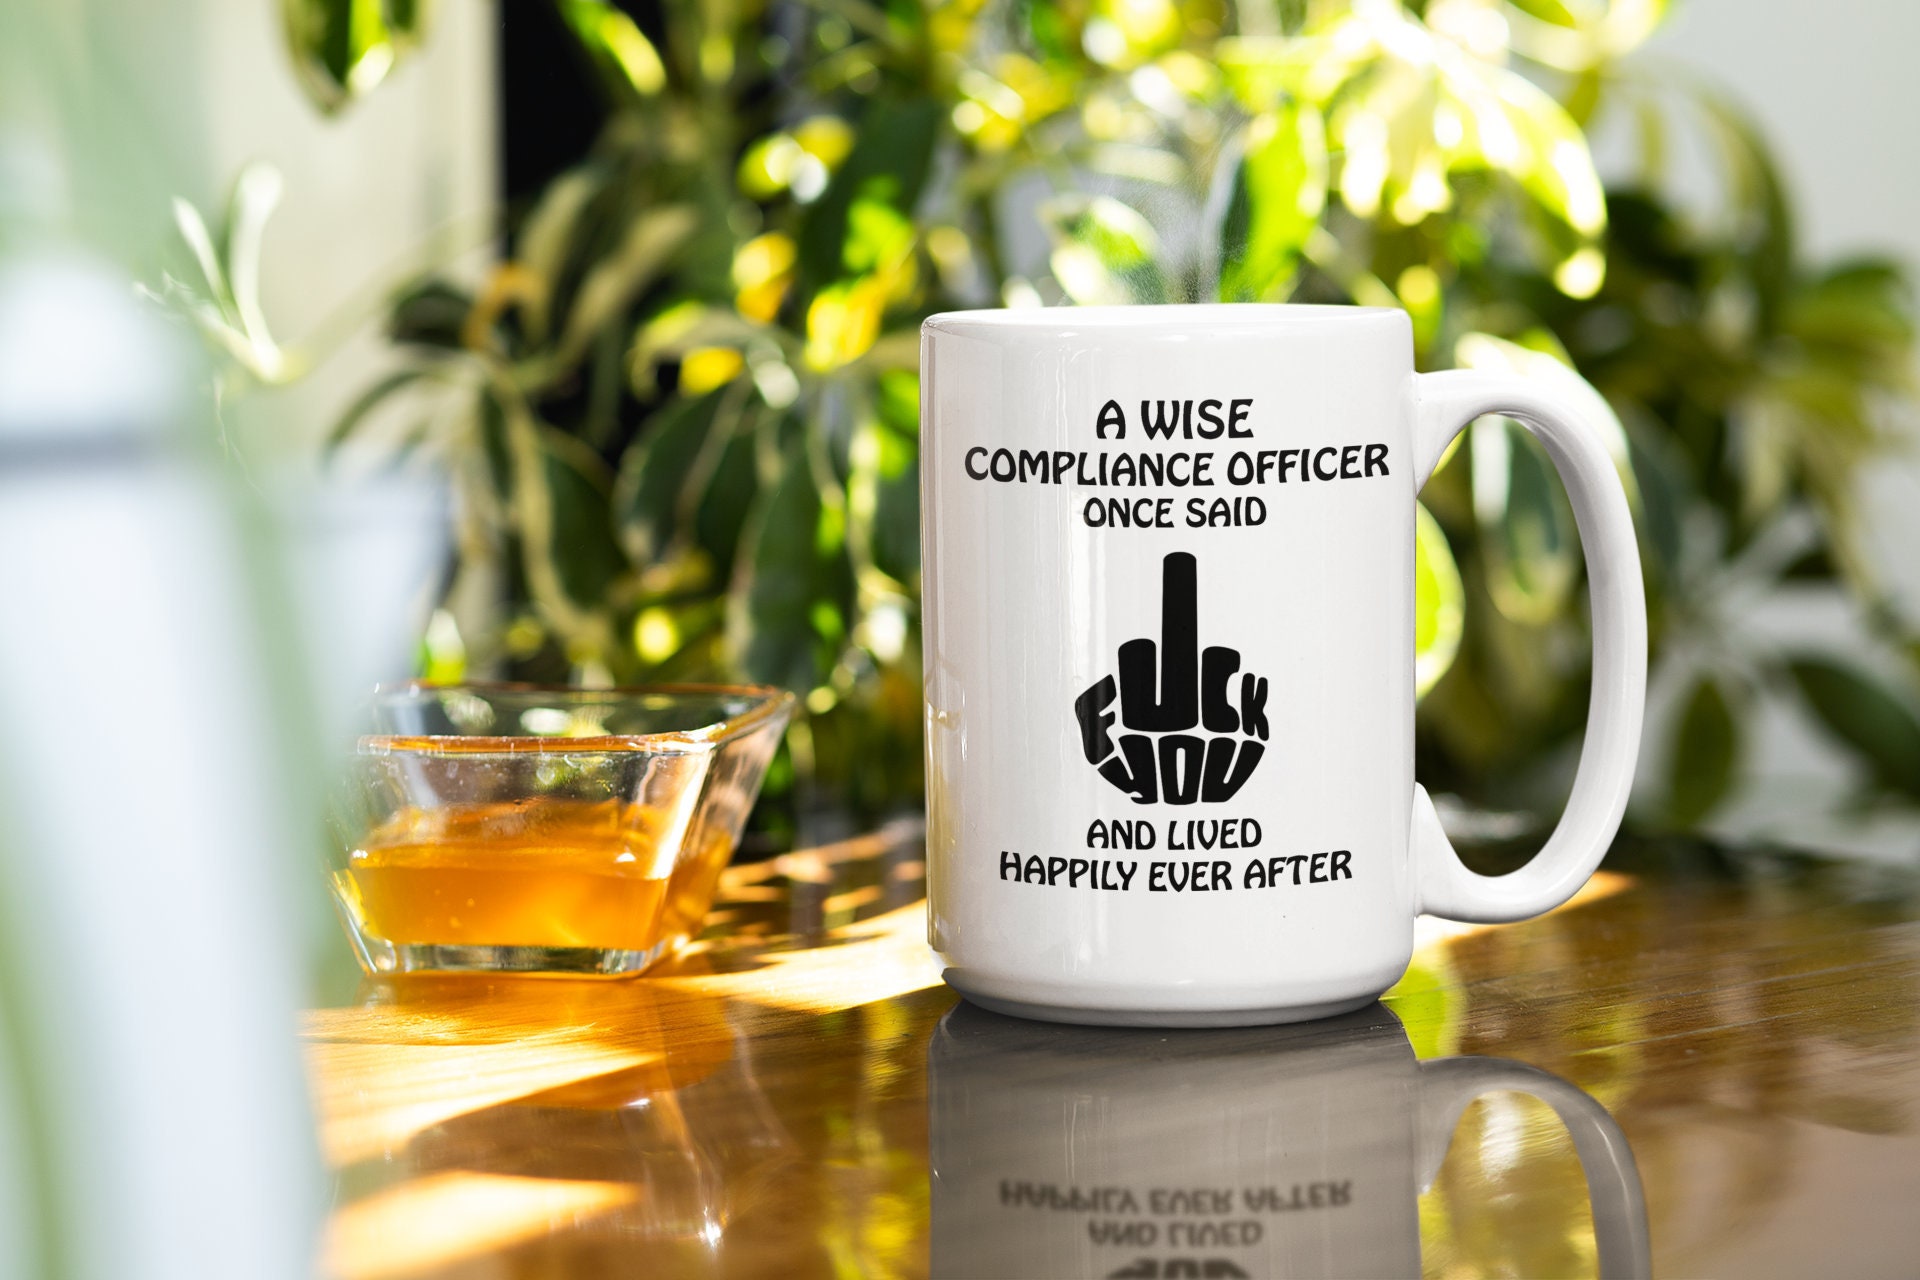 Compliance Officer Mug Tea Cup Gift Idea Ceramic For Him Her Husband Wife From L 